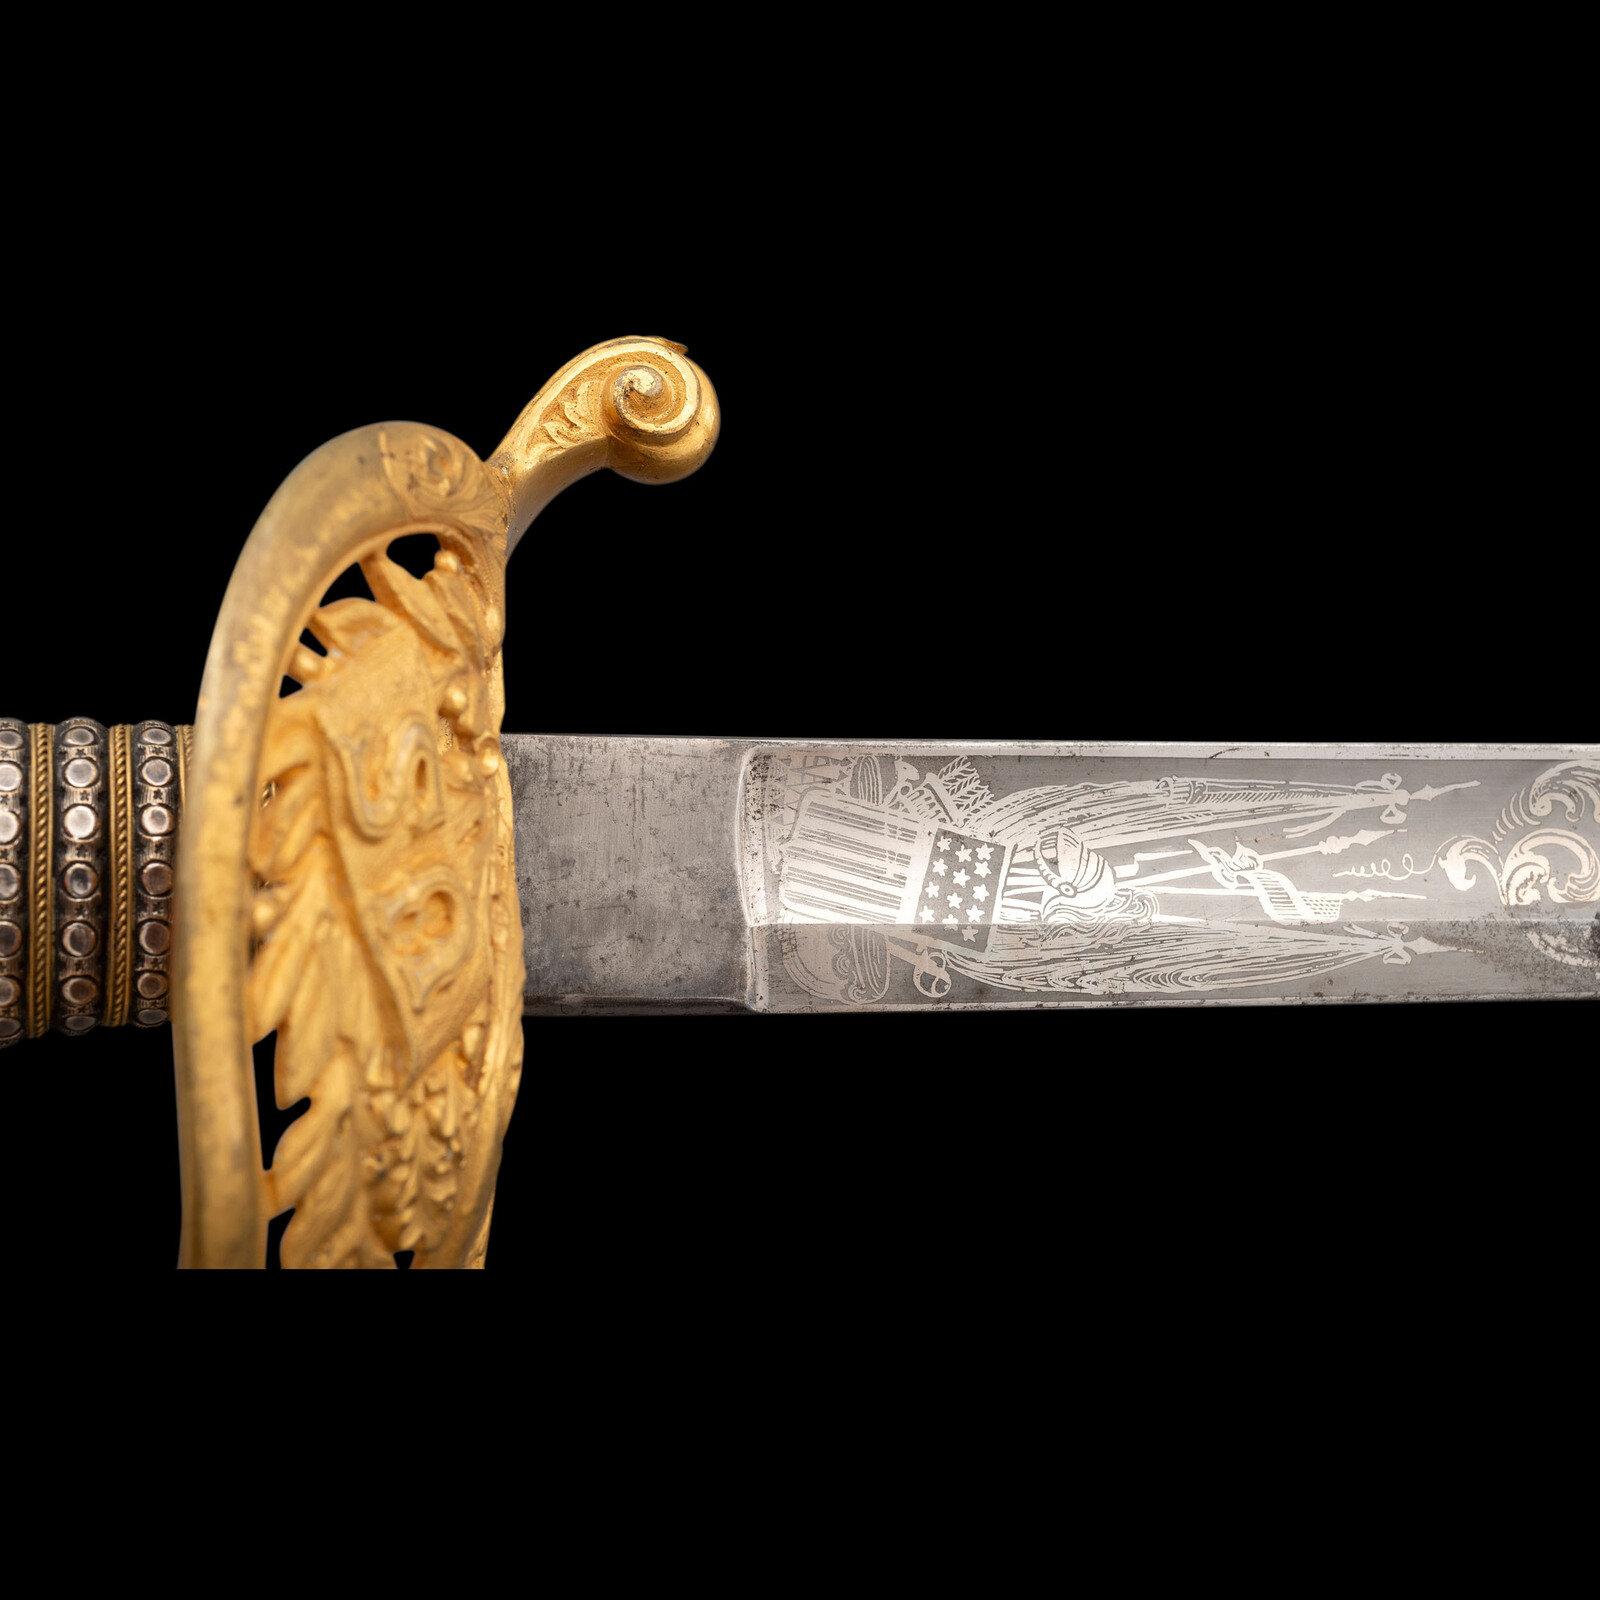 Published Clauberg US Model 1850 Officer's Sword of Lt. Thomas McClure  - KIA at Cold Harbor